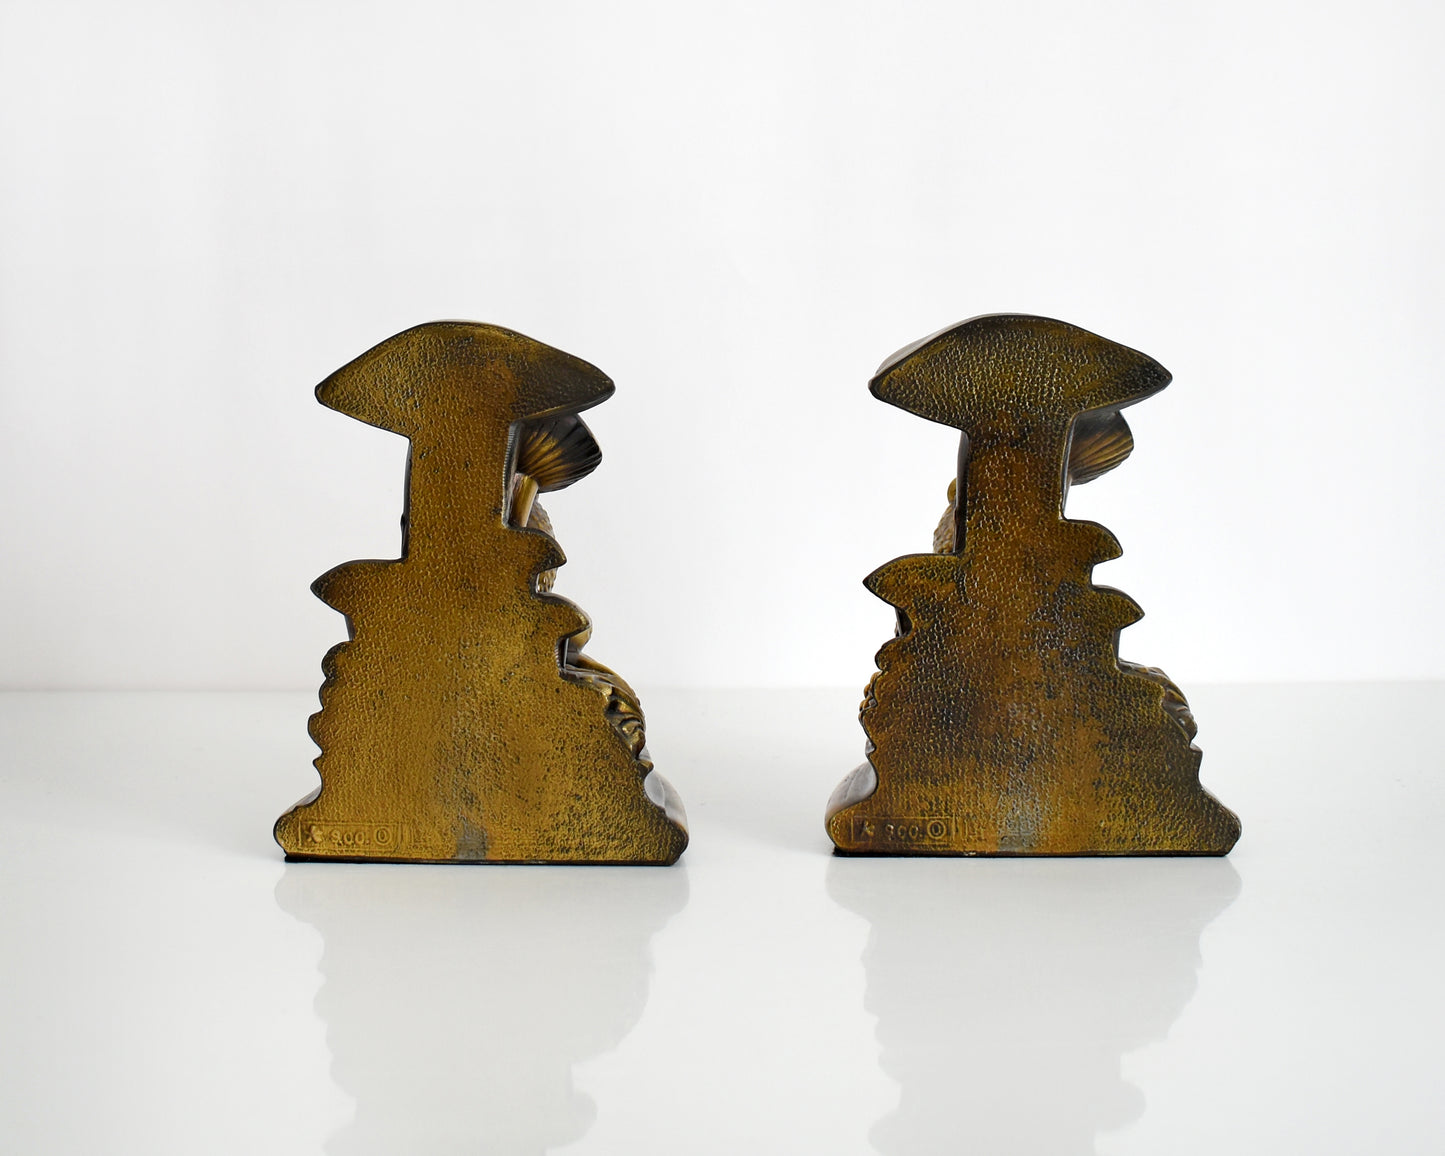 Back view of the brass frog and mushroom bookends